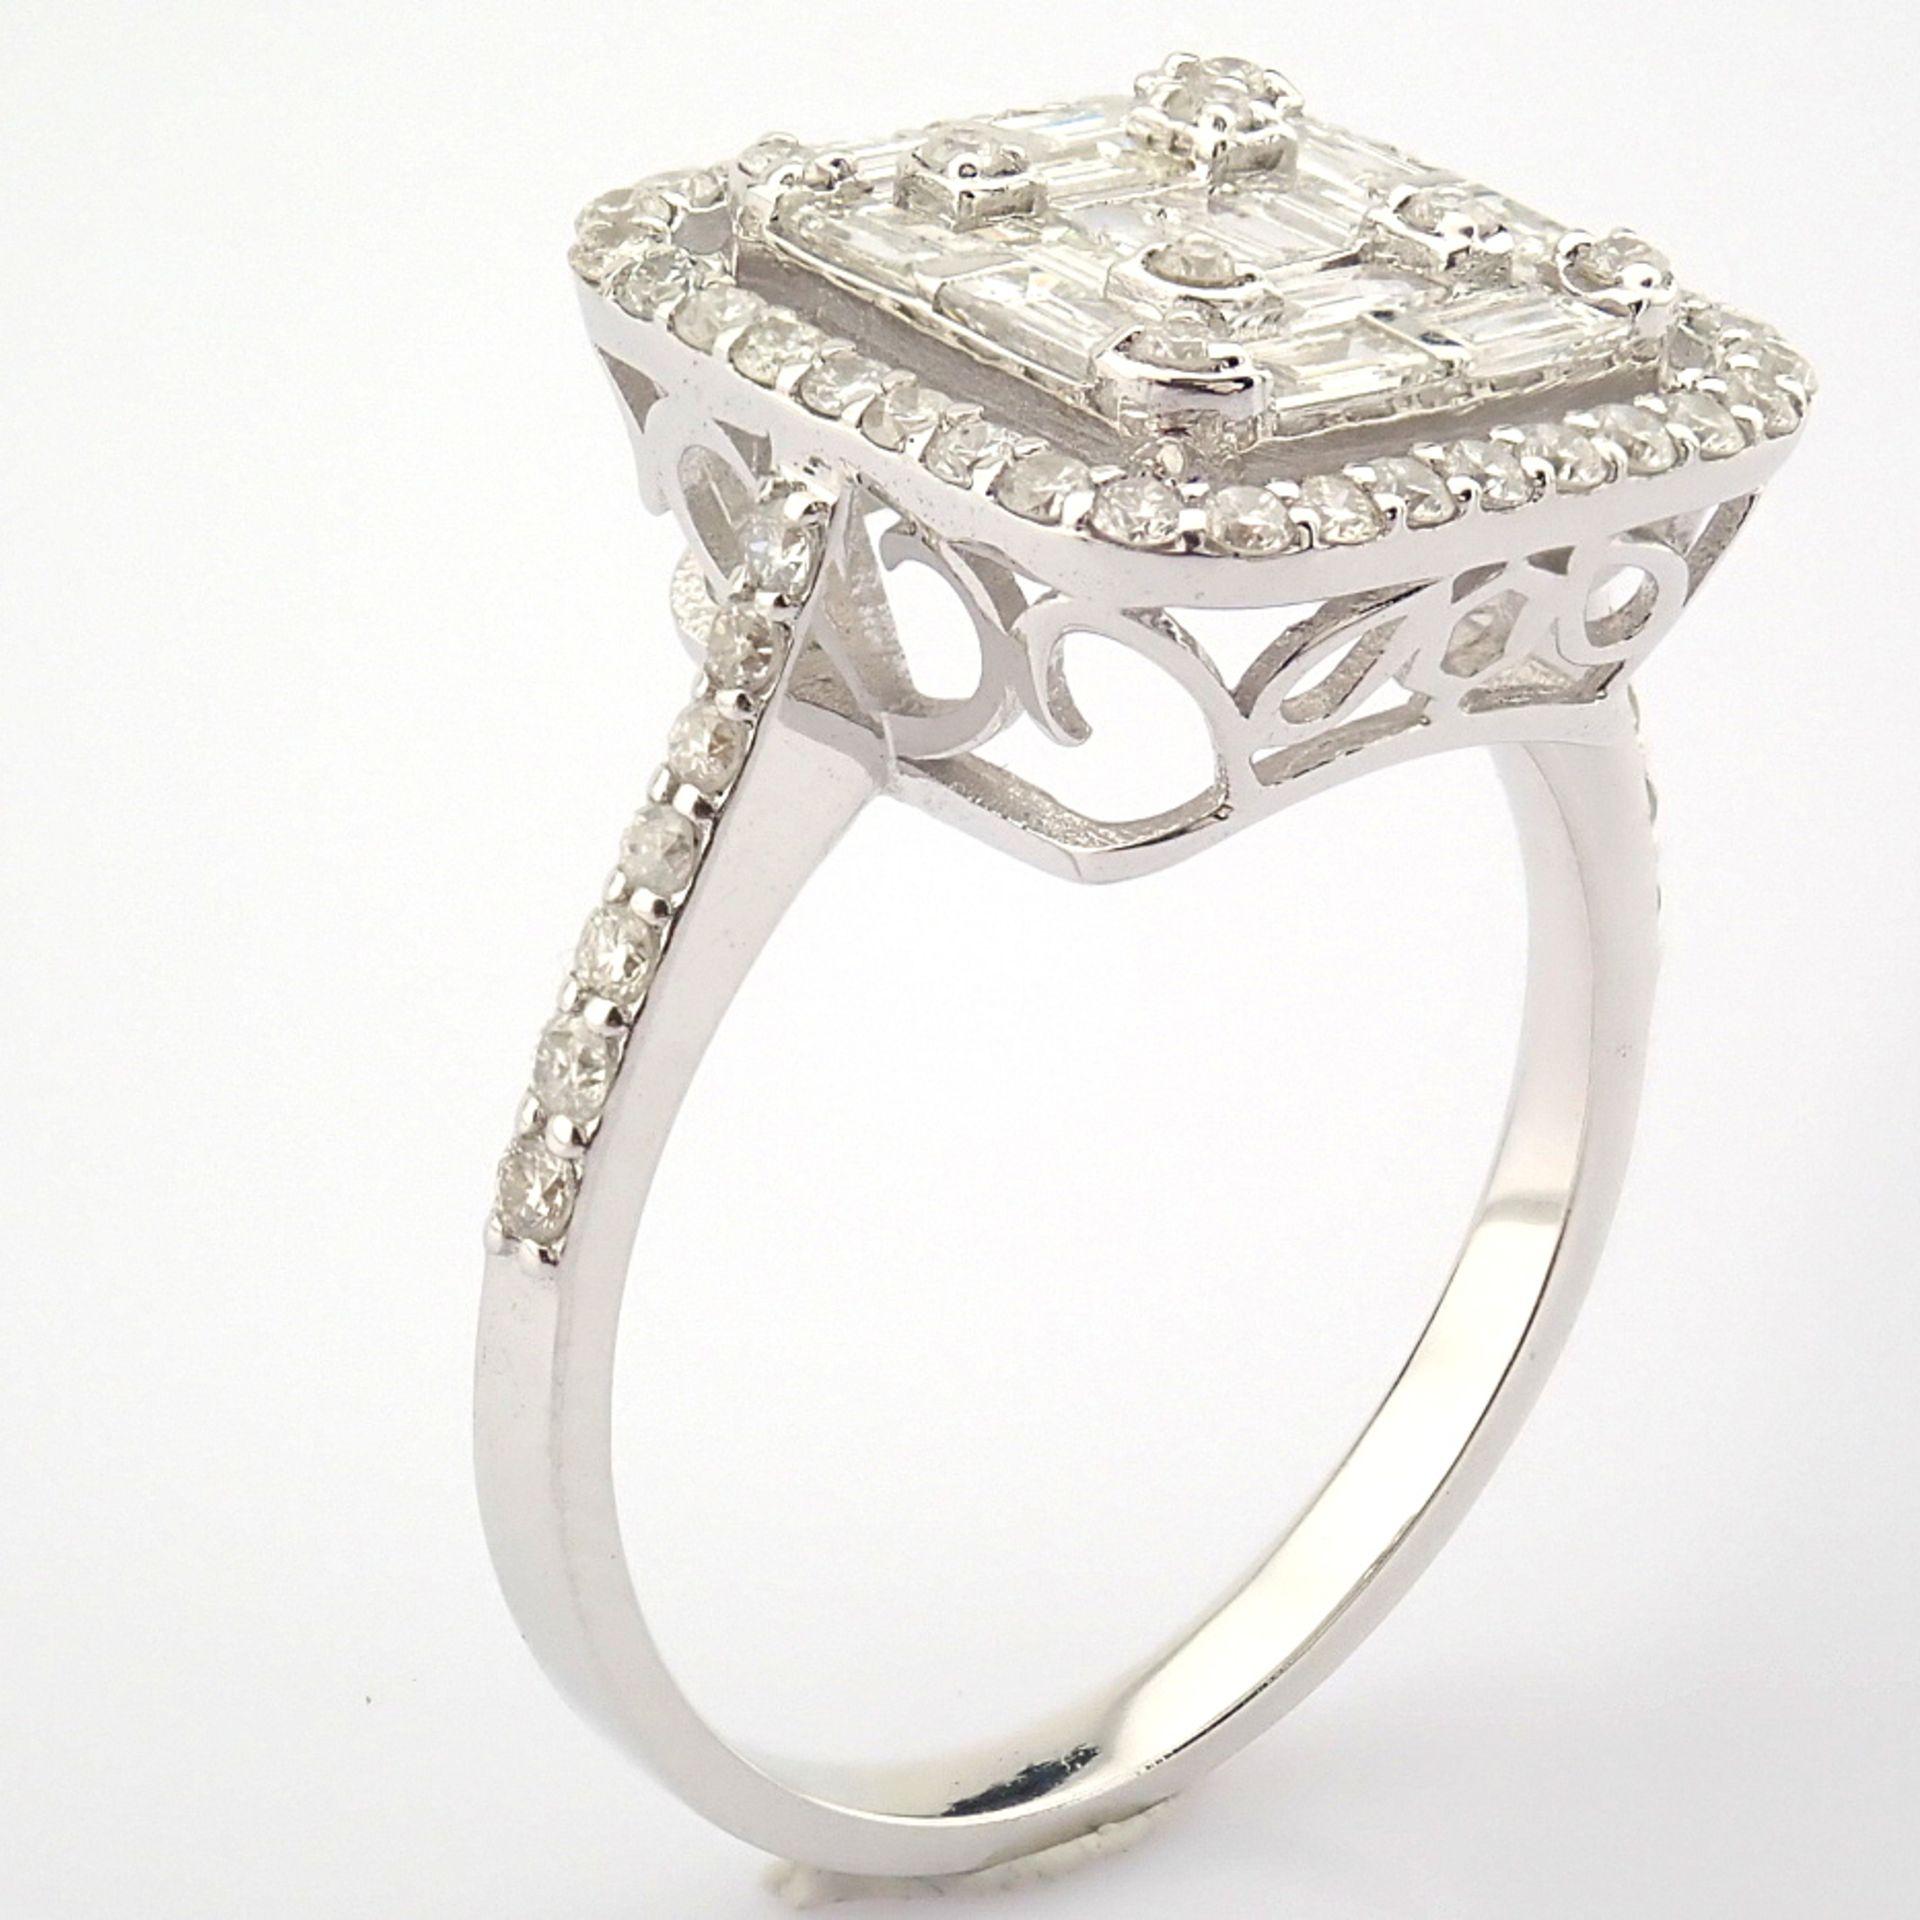 Certificated 14K White Gold Diamond Ring / Total 0.99 ct - Image 2 of 5